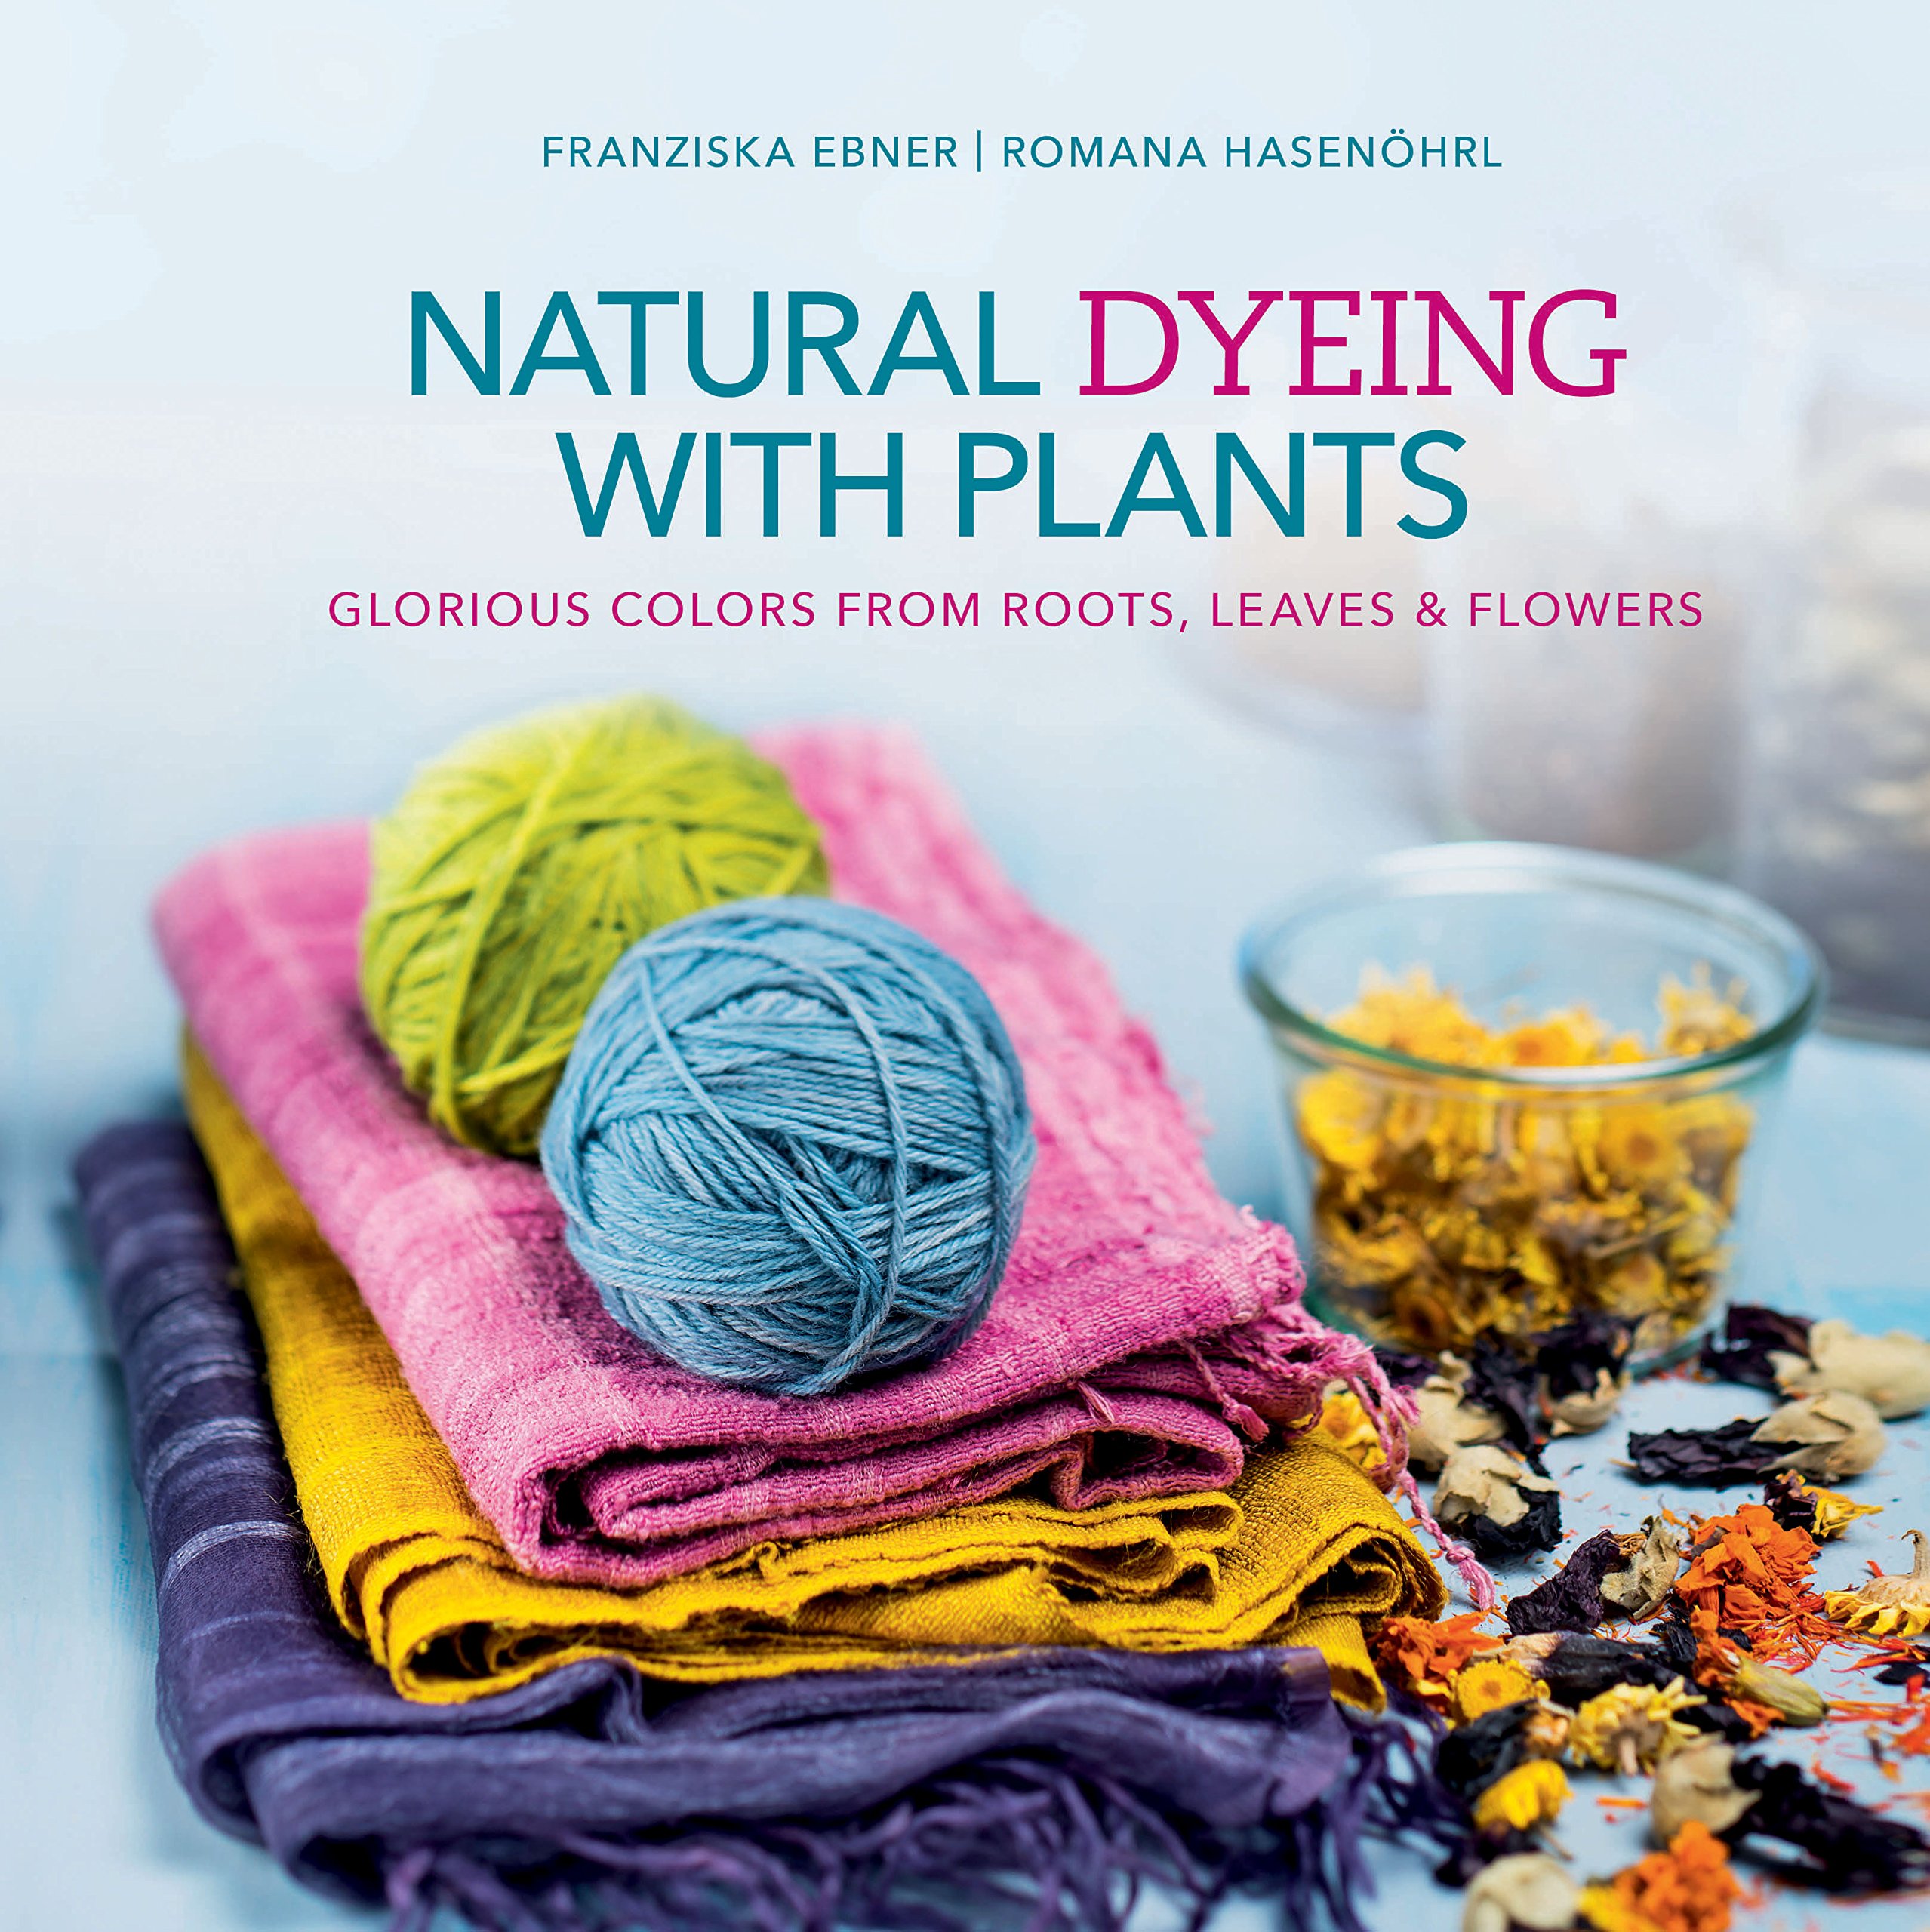 Natural Dyeing With Plants by Franziska Ebner and Romana Hasenoehrl